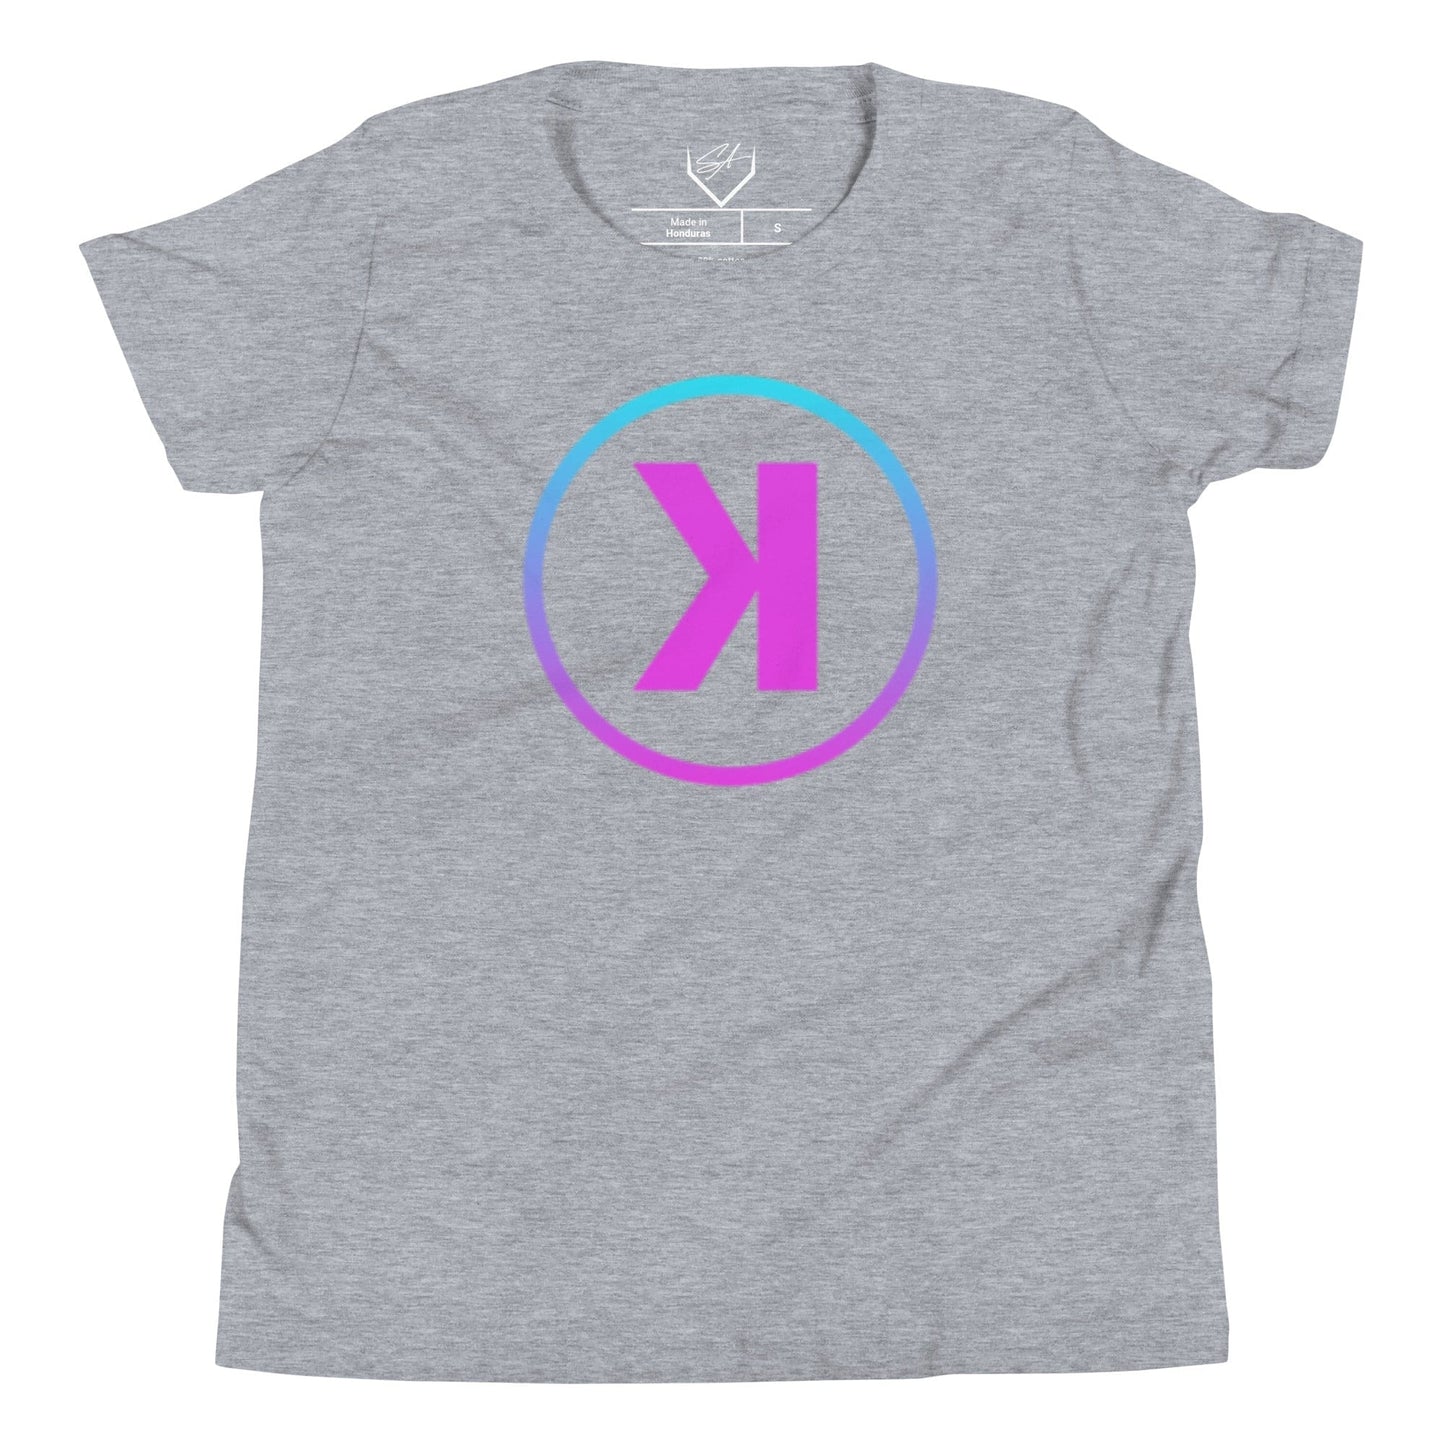 Command The Circle - Youth Tee